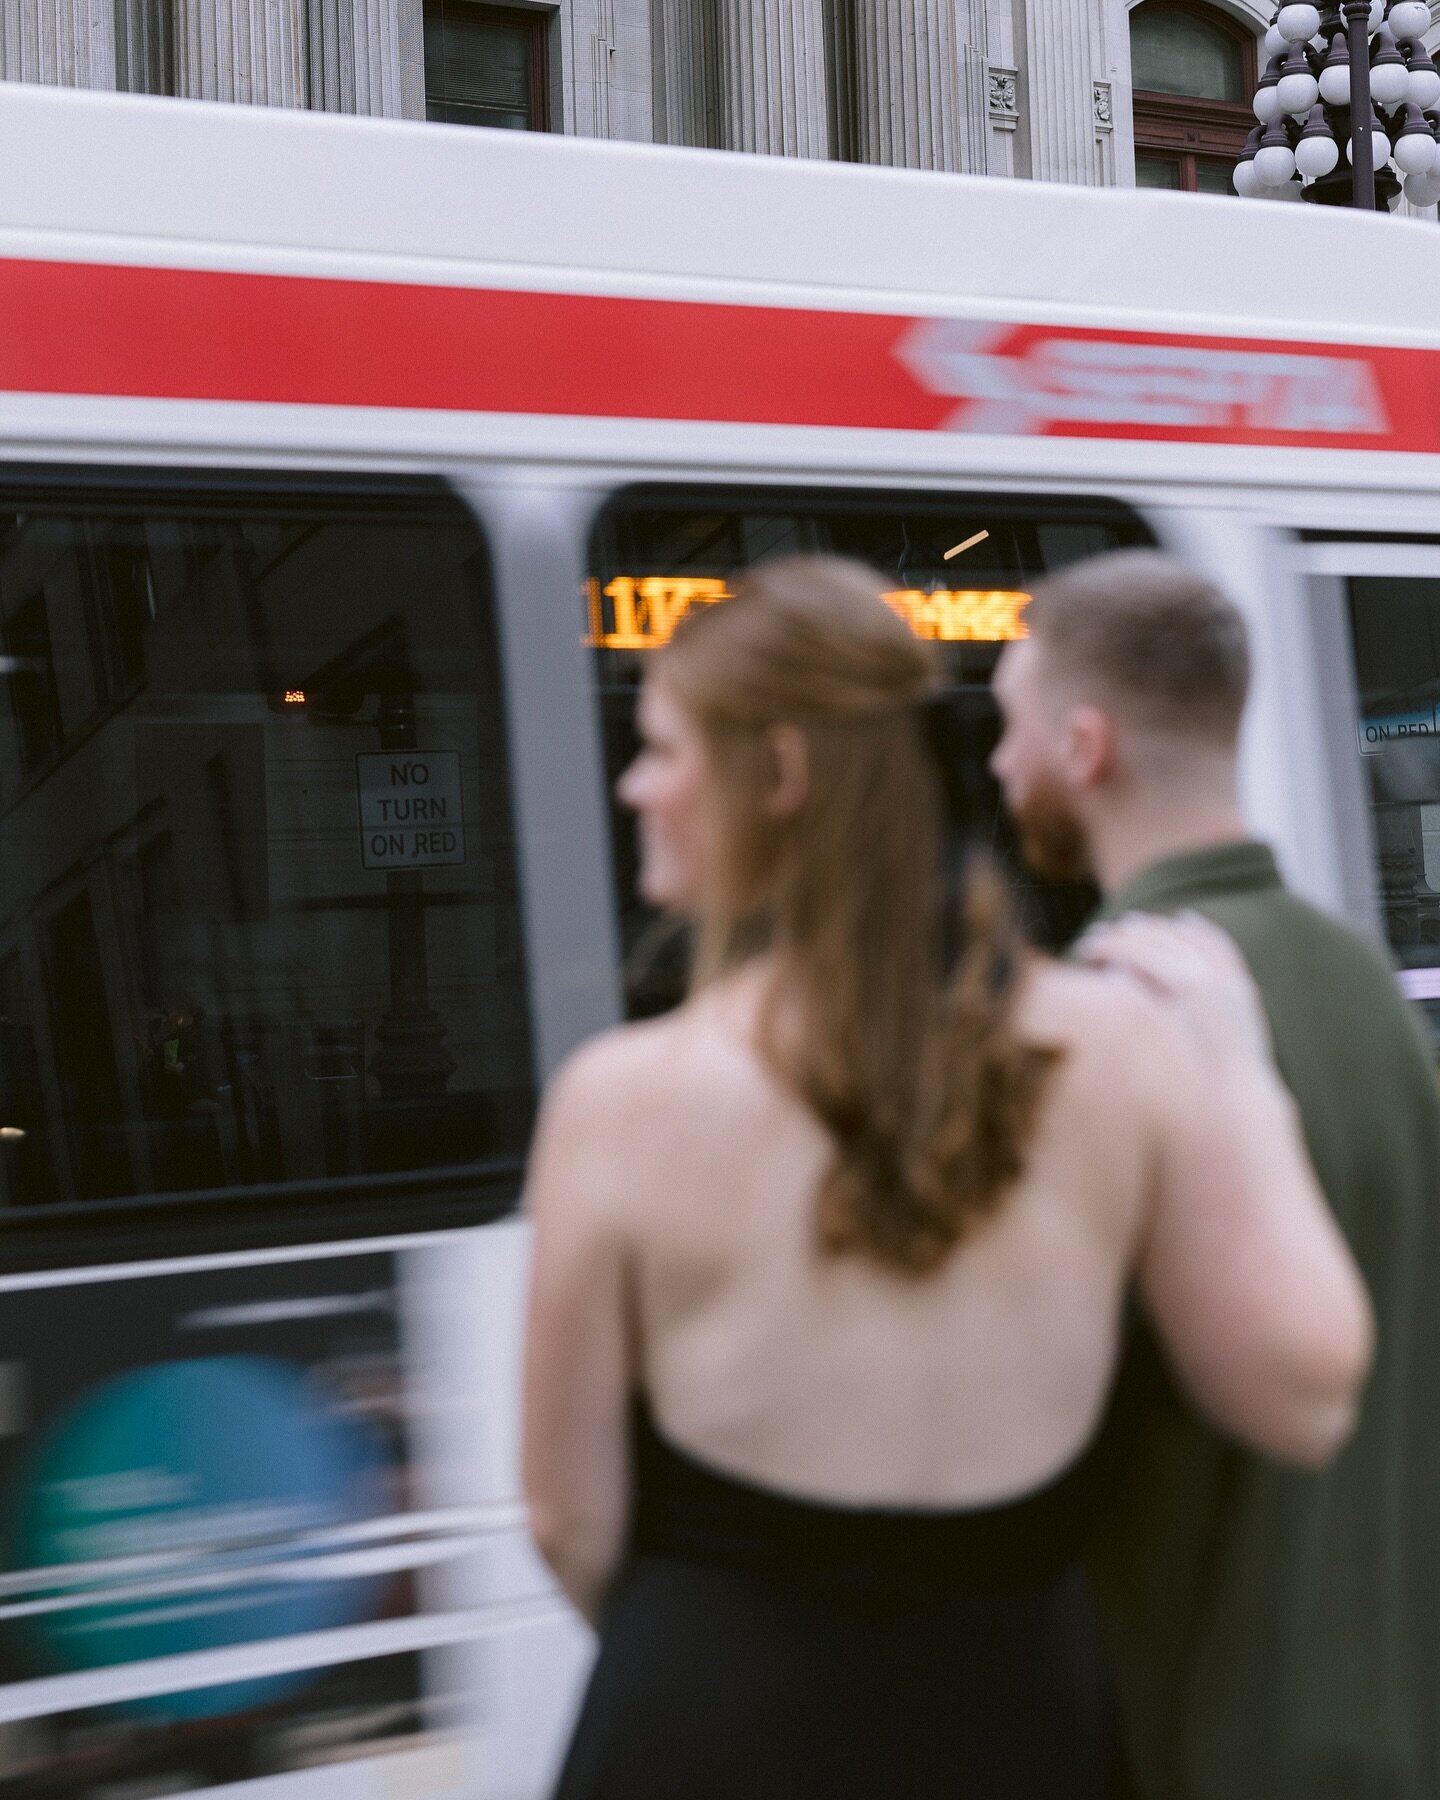 Tell me you&rsquo;re from Philly, without telling me you&rsquo;re from Philly 
.
.
.
#septa #philadelphiapa #philadelphiaengagement #philadelphiaphotographer